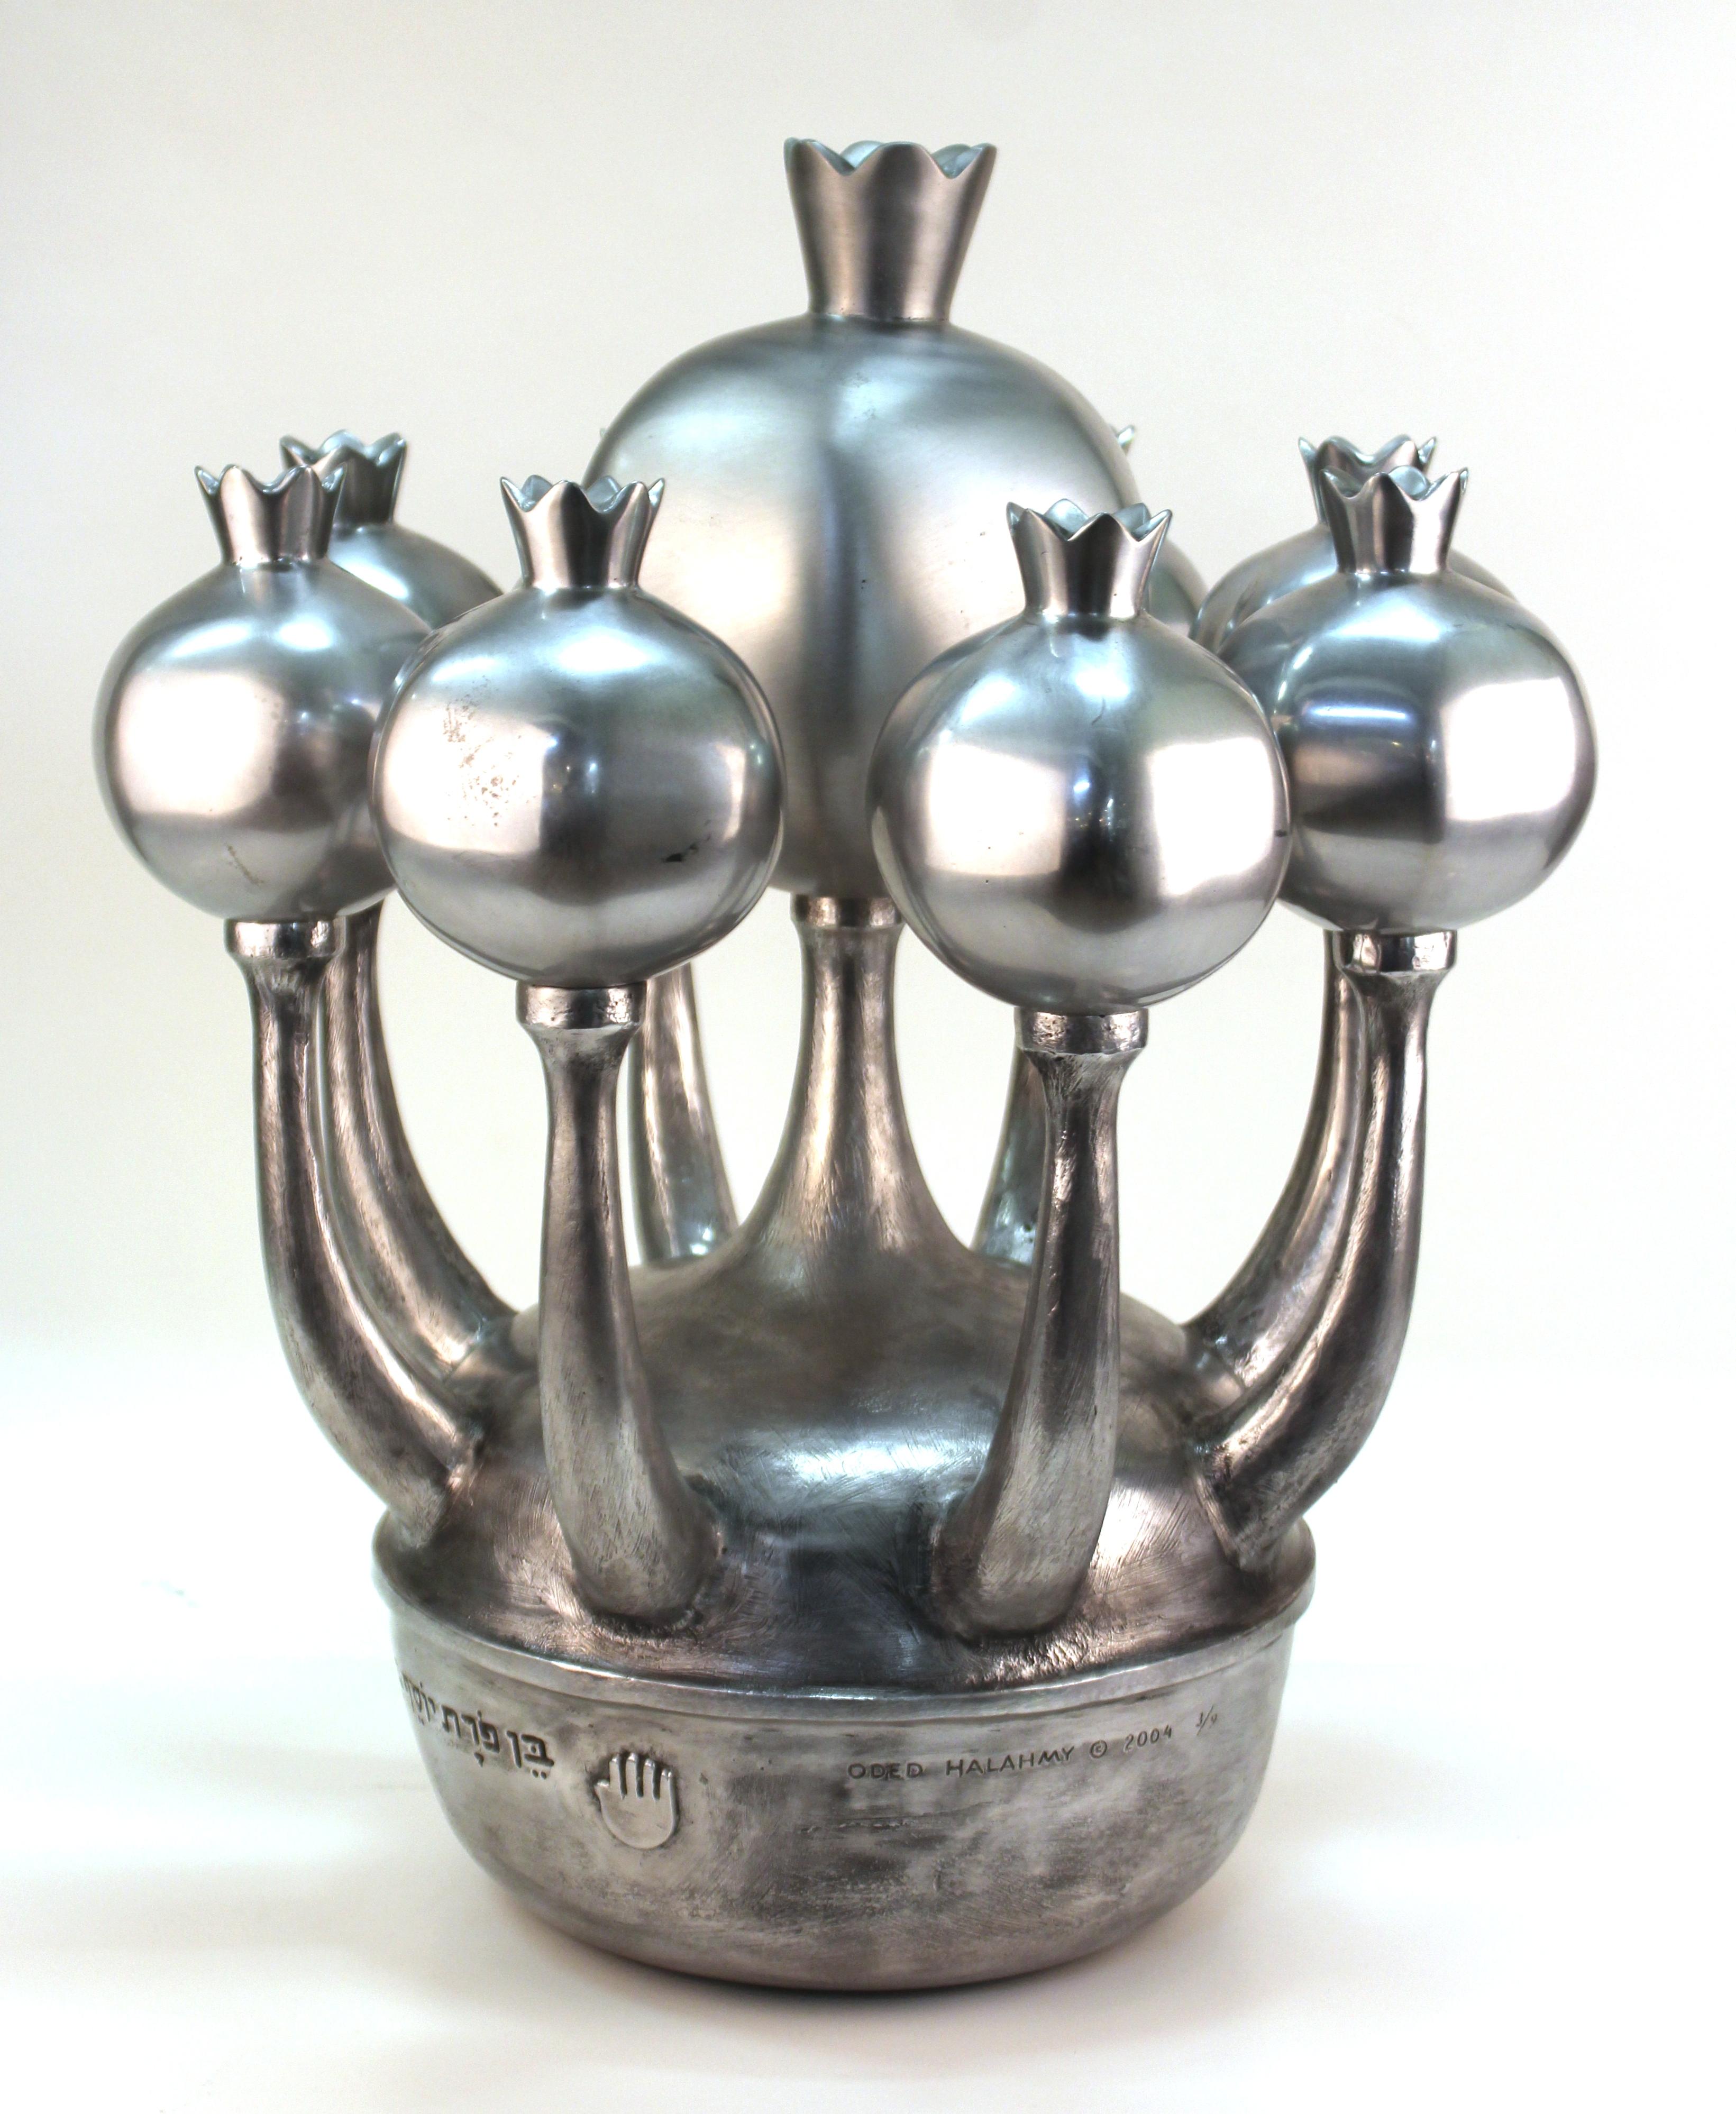 Modern cast aluminium menorah by Oded Halahmy, titled 'Baghdad Lights For Peace', created in 2004. Marked by the artist and dated on the side, from an edition of nine. In great vintage condition.